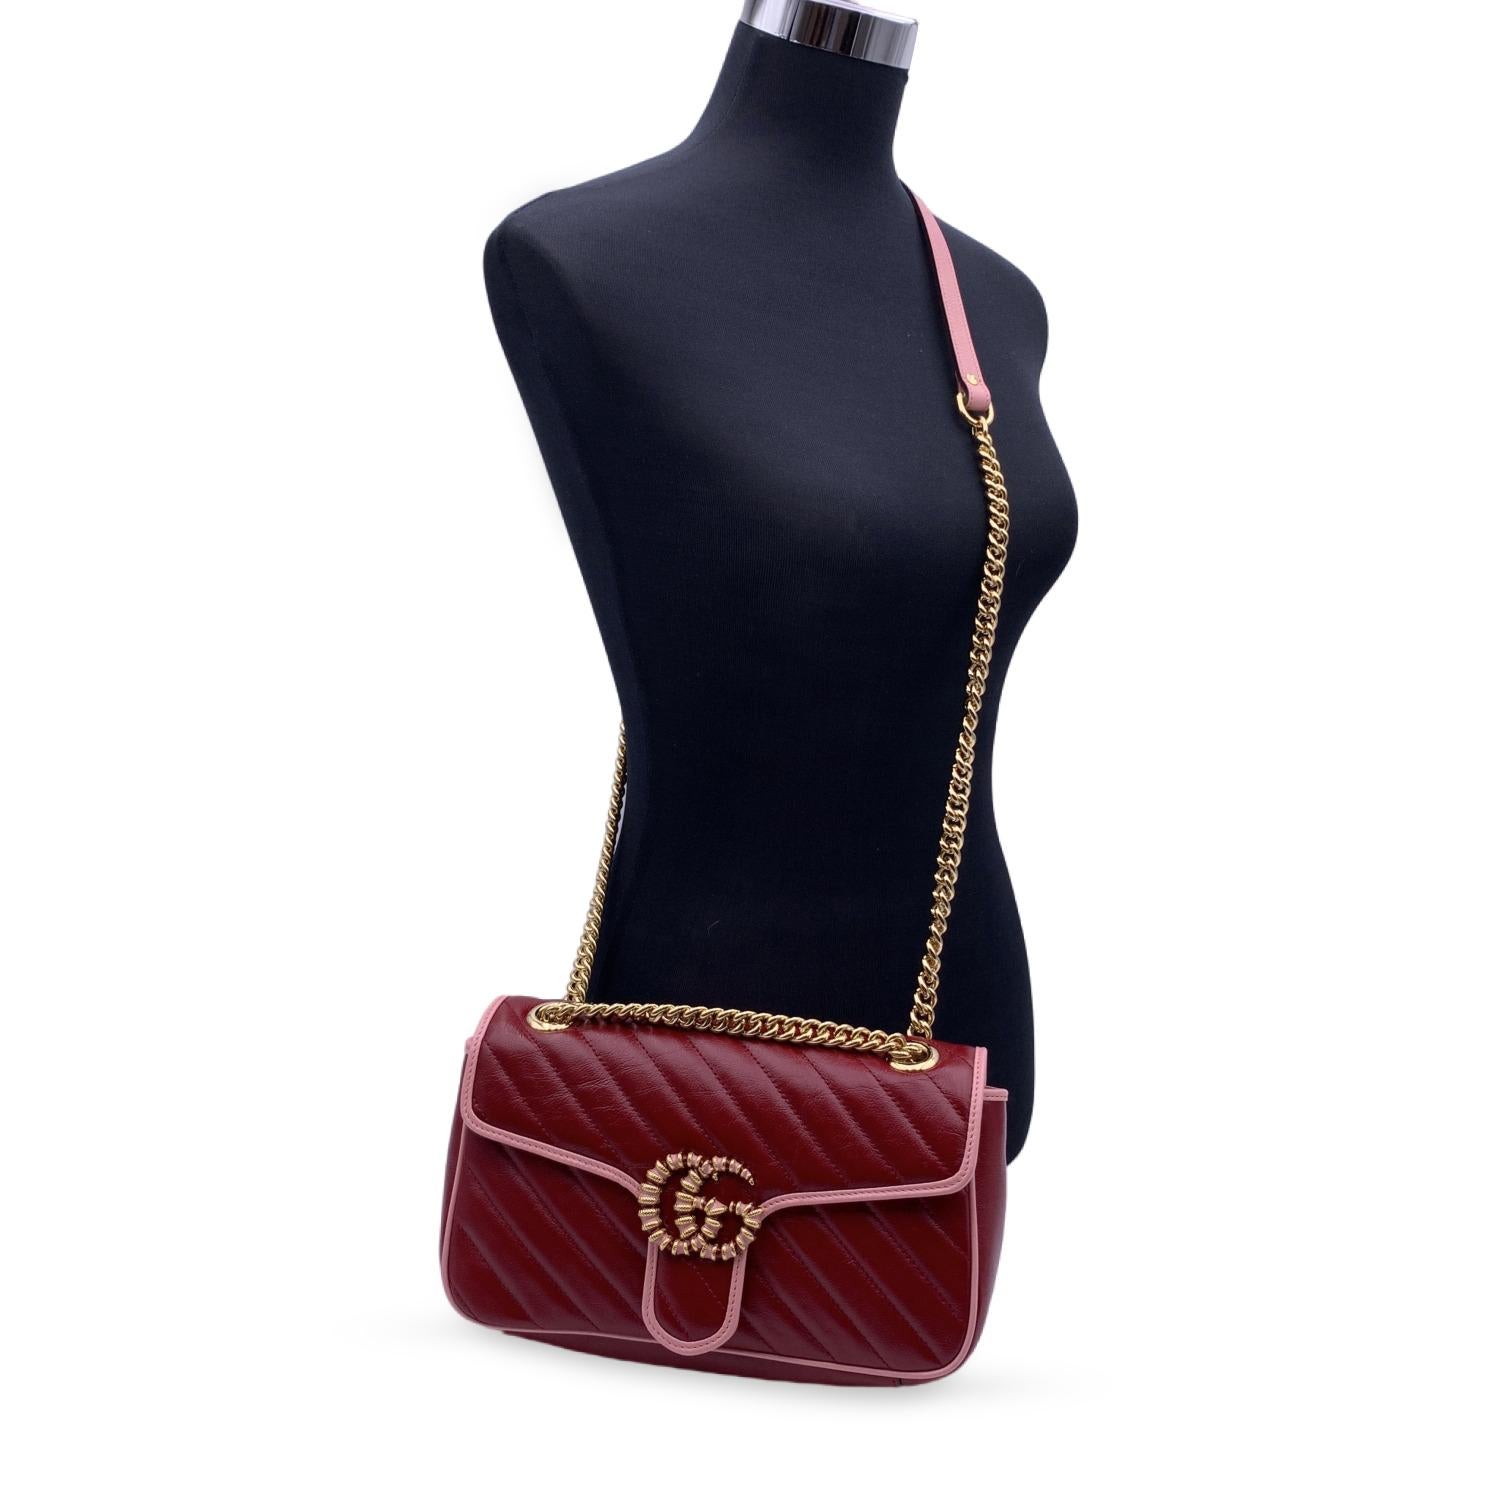 Beautiful Gucci GG Marmont Diagonal shoulder bag in red quilted leather.The bag features diagonal matelassé leather and pink leather trim. Gold metal double GG logo on the front with pink and red enamel. Flap with spring closure. Leather and gold